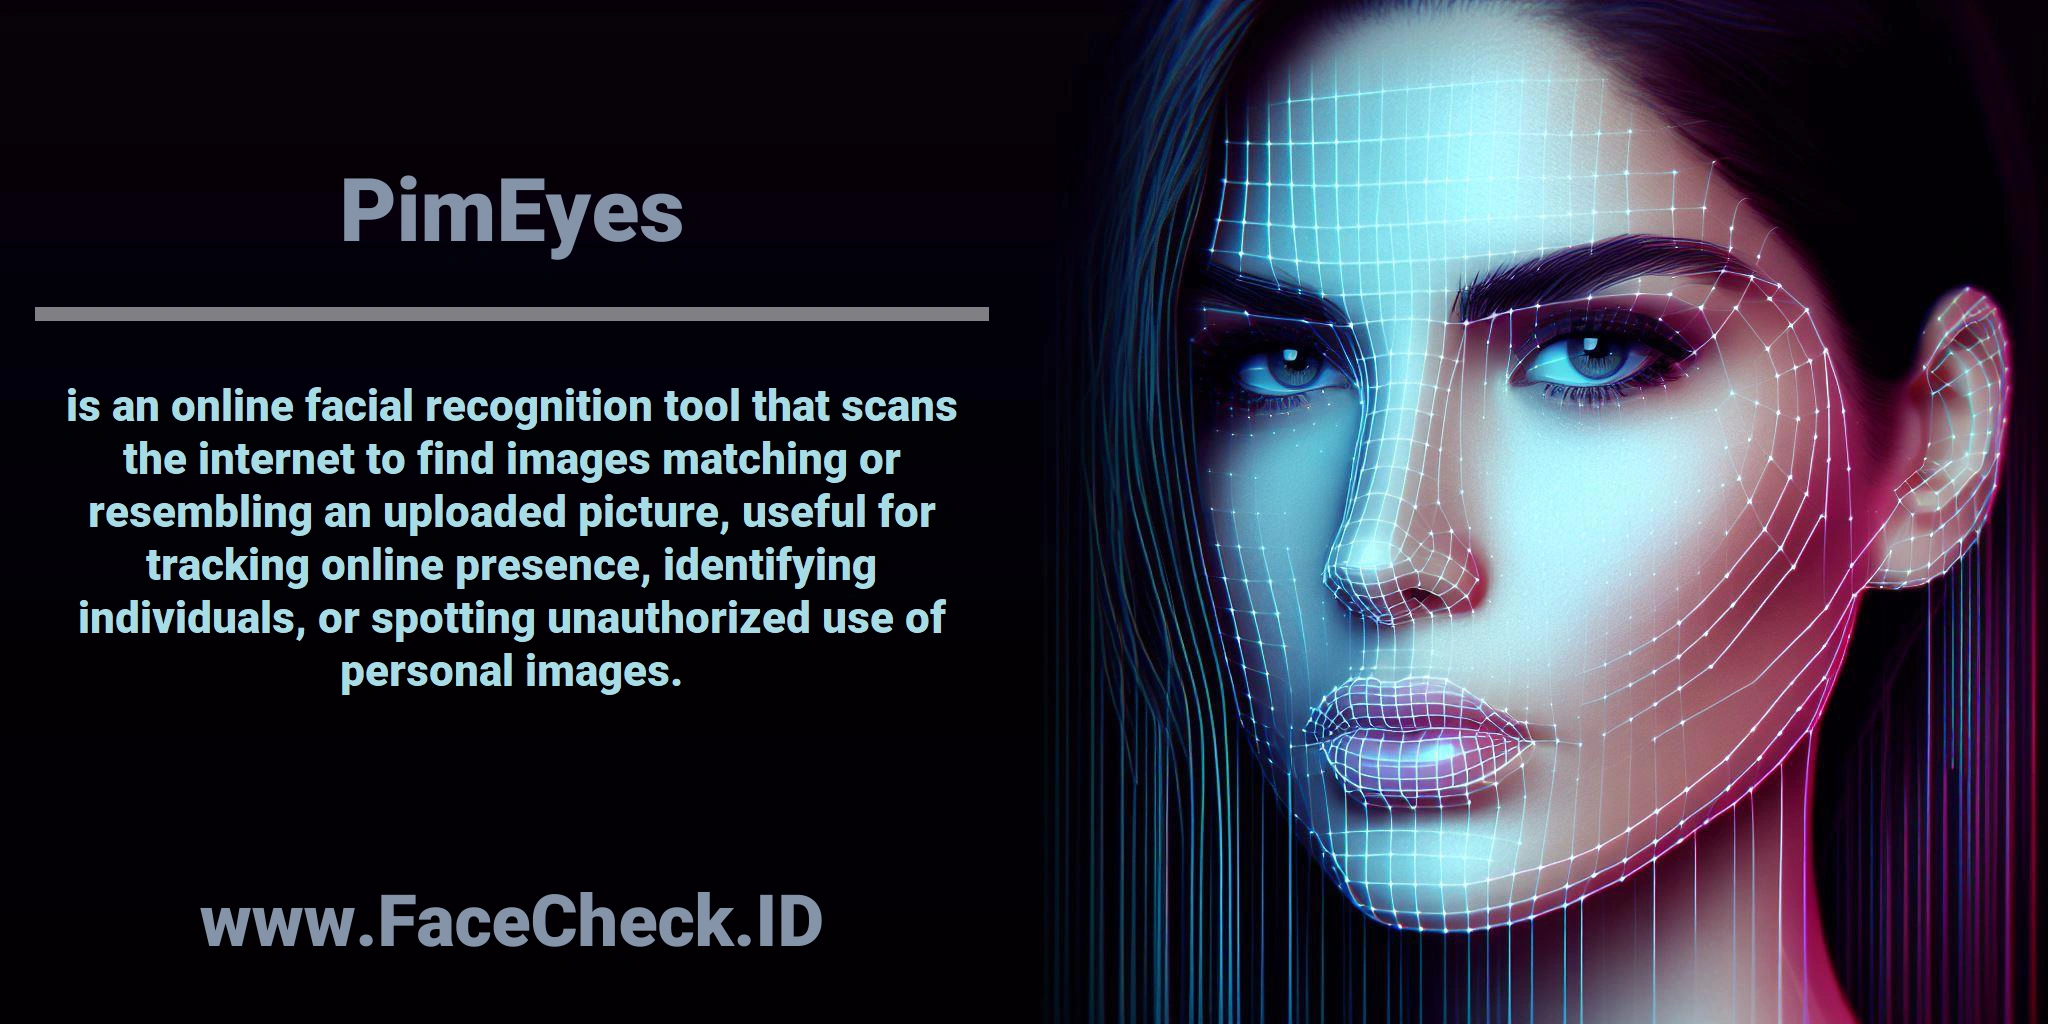 <b>PimEyes</b> is an online facial recognition tool that scans the internet to find images matching or resembling an uploaded picture, useful for tracking online presence, identifying individuals, or spotting unauthorized use of personal images.